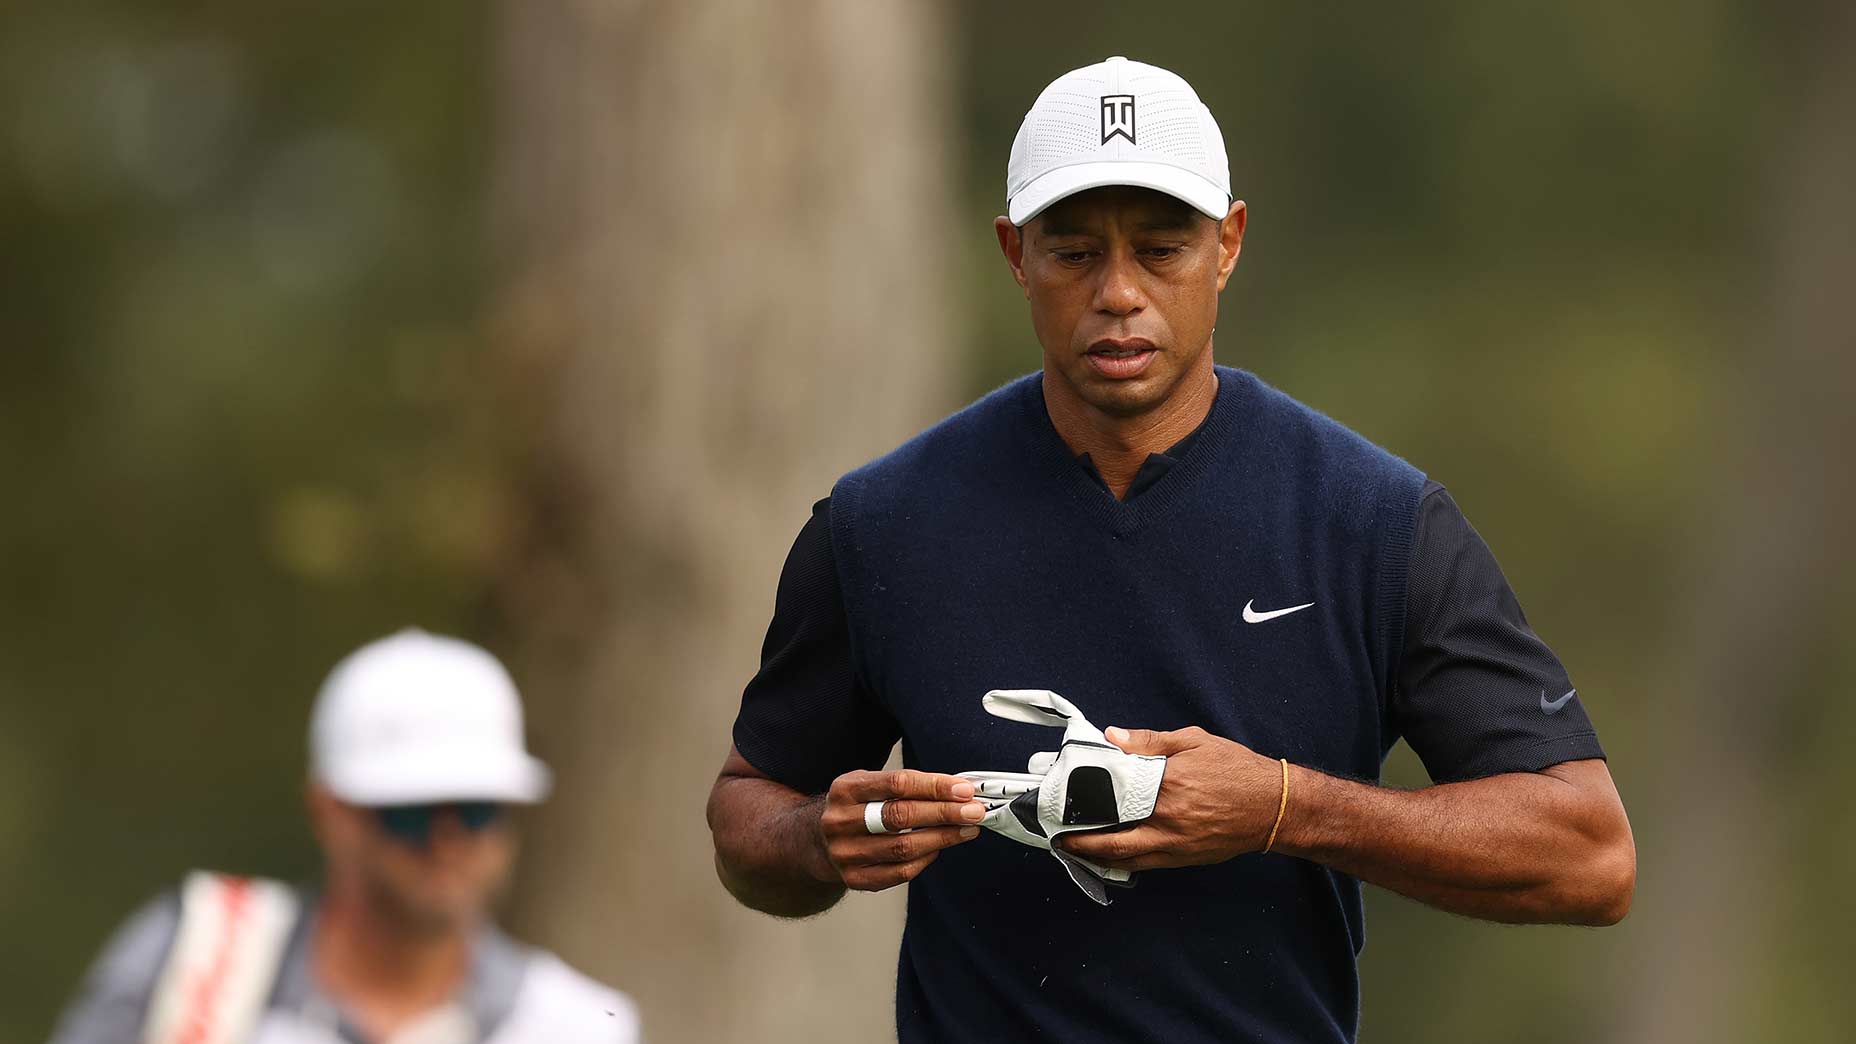 Us Open 2020 Missed Fairways And Bogeys Cost Tiger Woods In Round 1